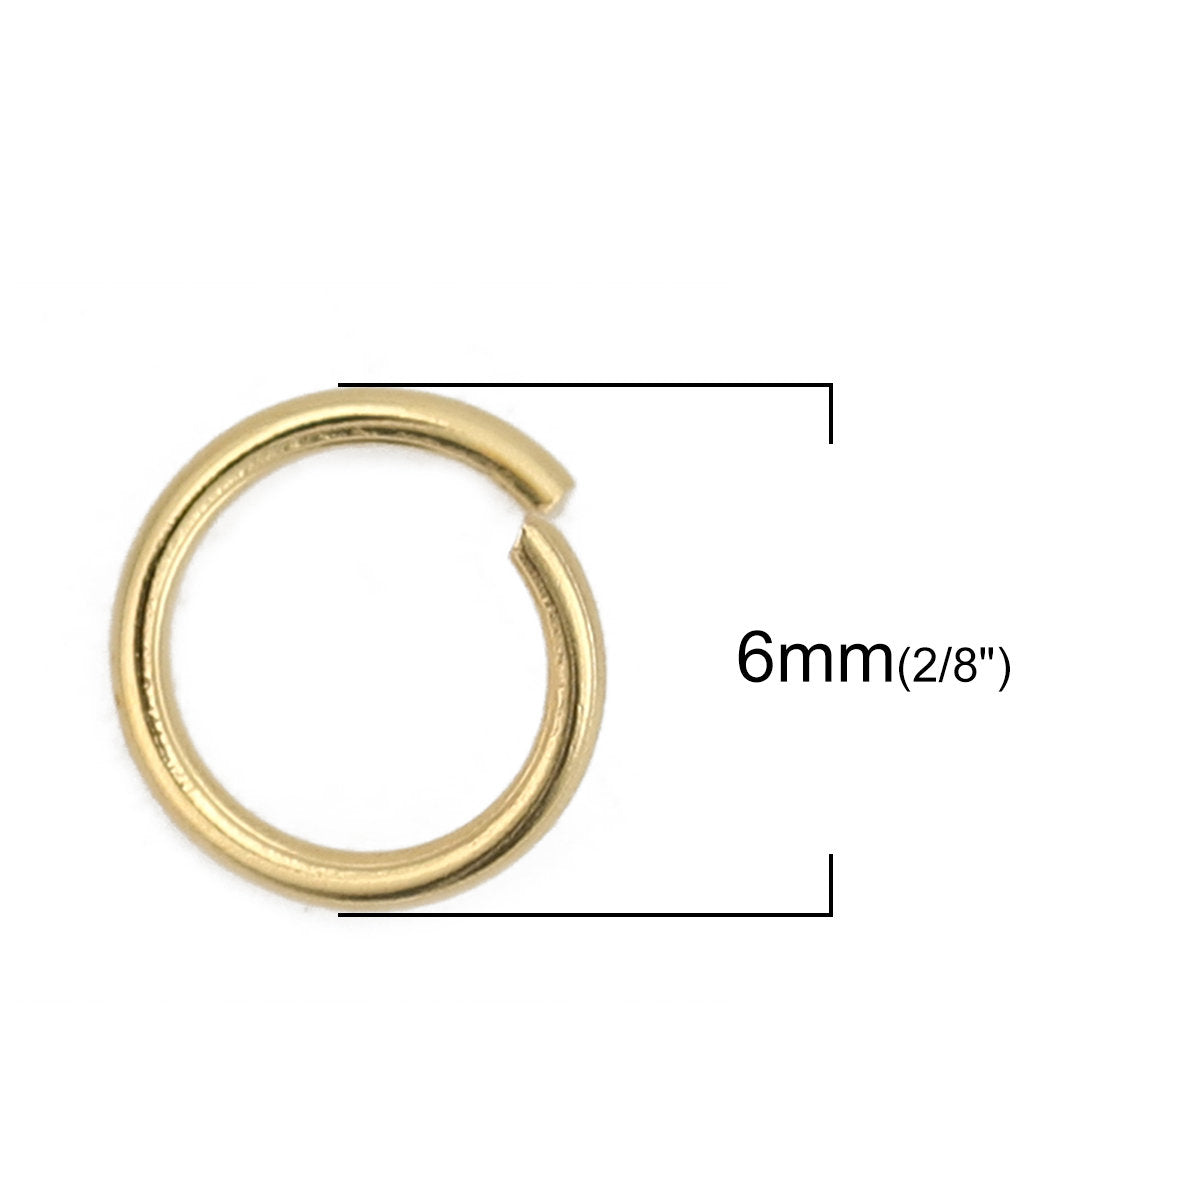 Stainless steel jump ring hypoallergenic gold jump ring 3, 4, 5 or 6mm - 200pcs